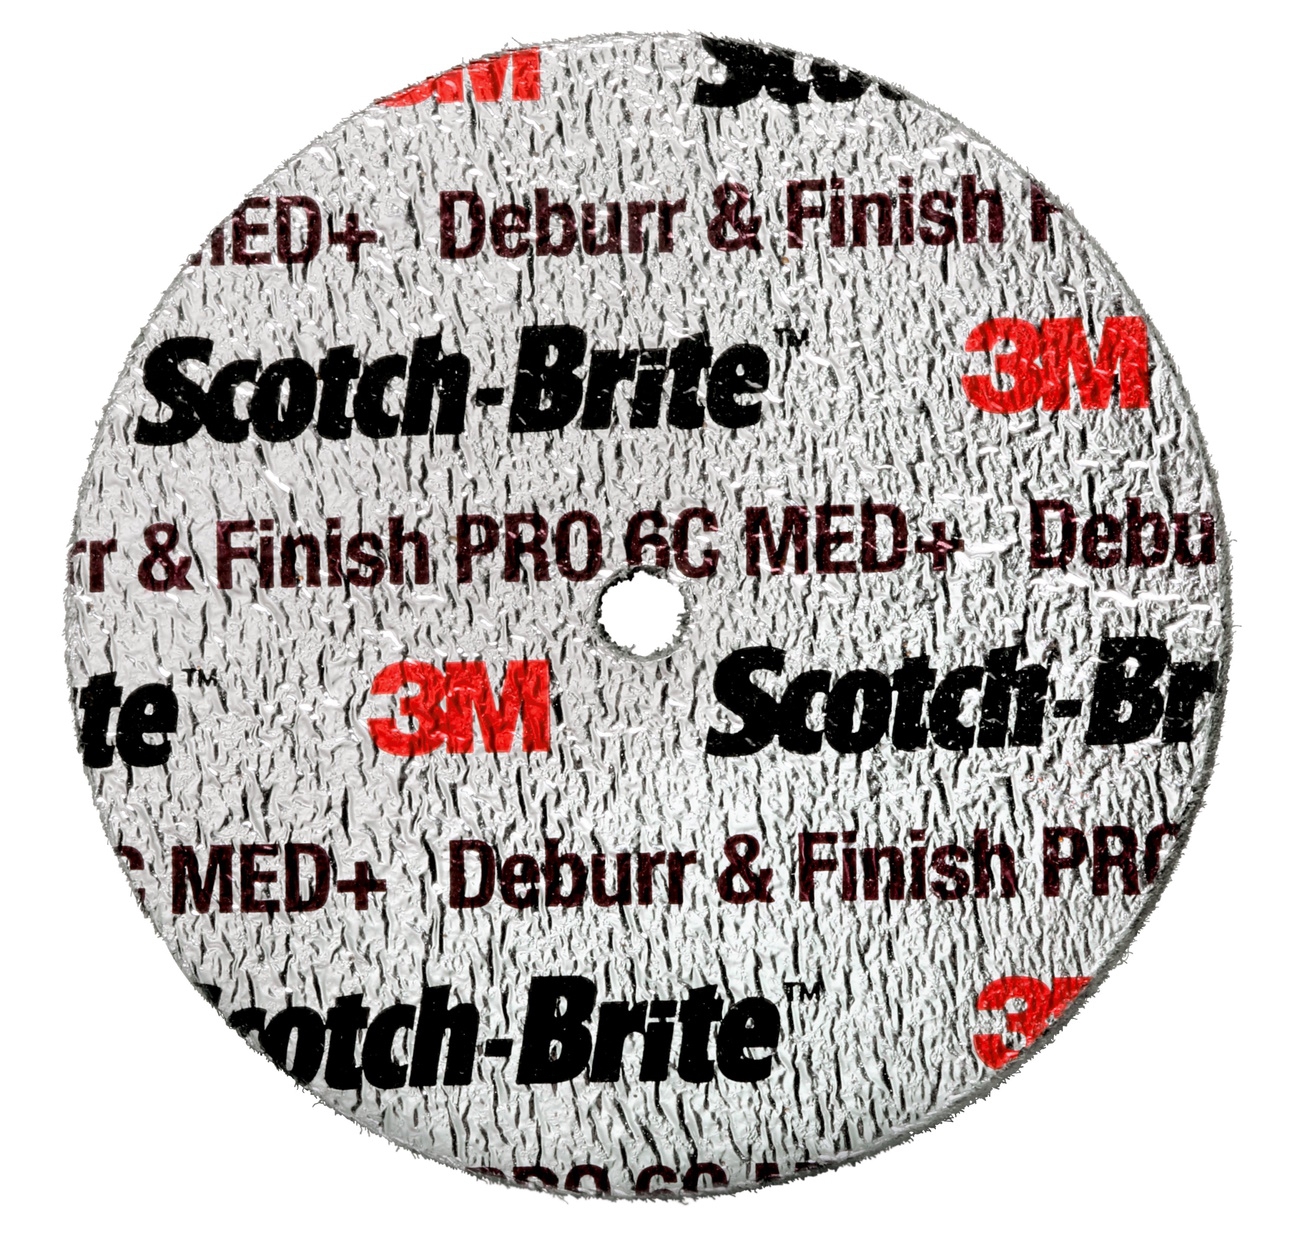 3M Scotch-Brite Deburr and Finish PRO compact disc DP-UW, 75 mm x 3.18 mm x 6.35 mm, 6C MED+